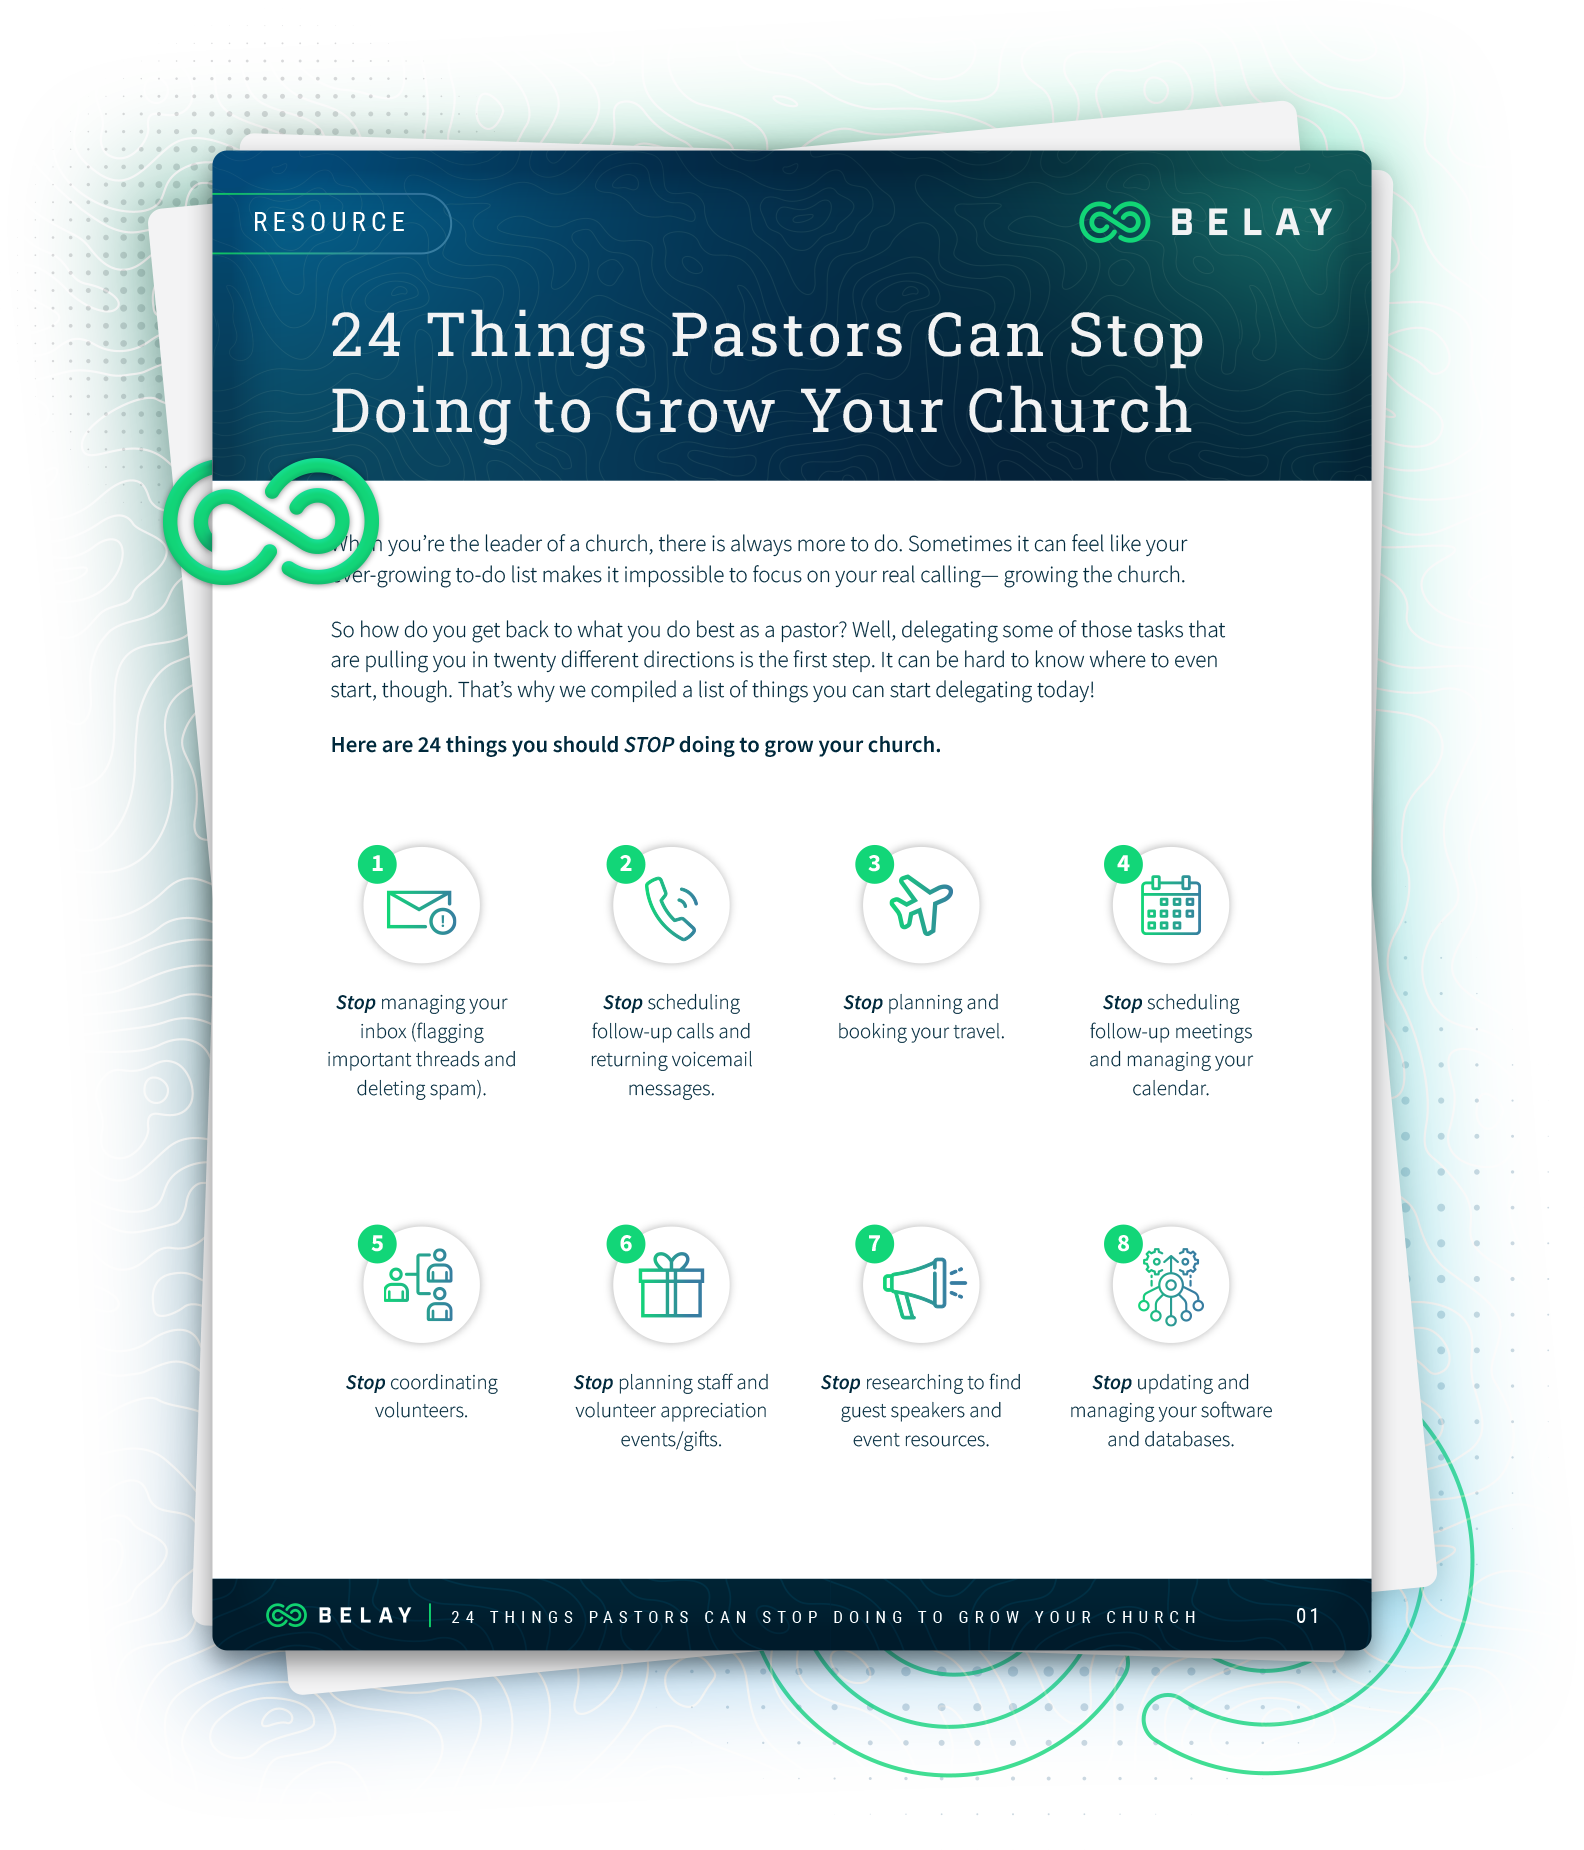 24 Things Pastors Can Stop Doing to Grow Your Church